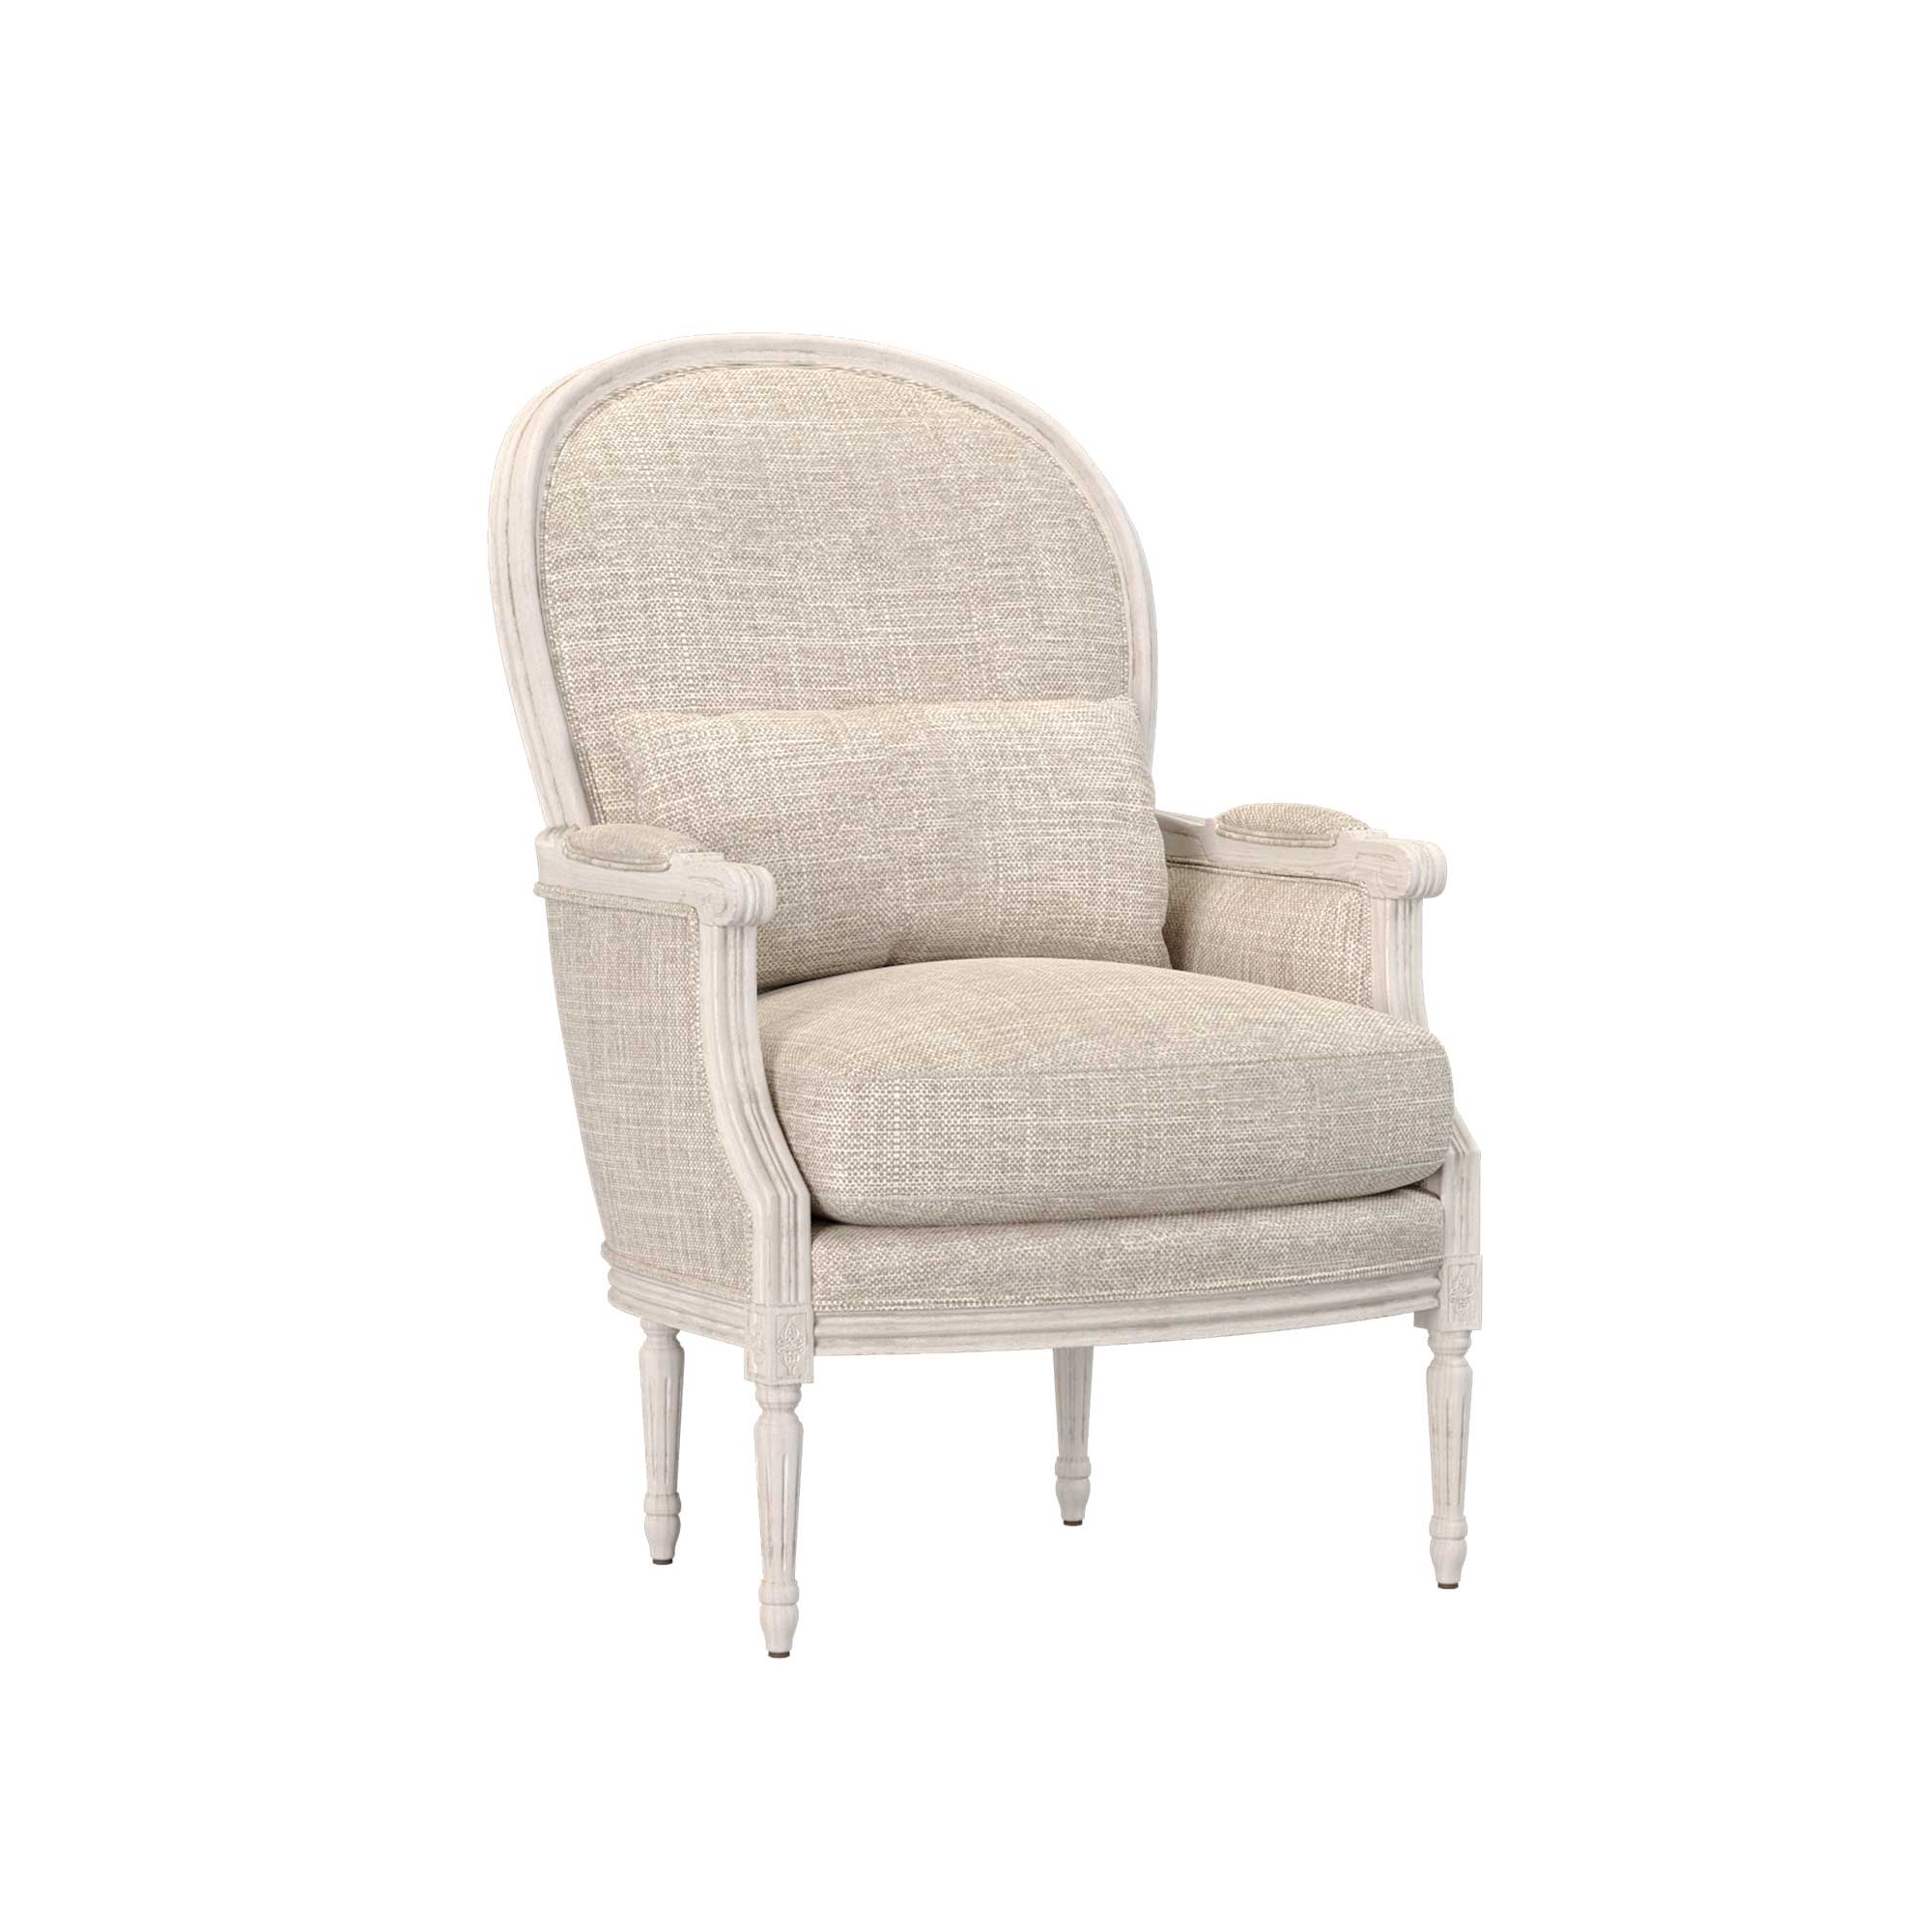 Adele Neutral Lounge Chair in Oats